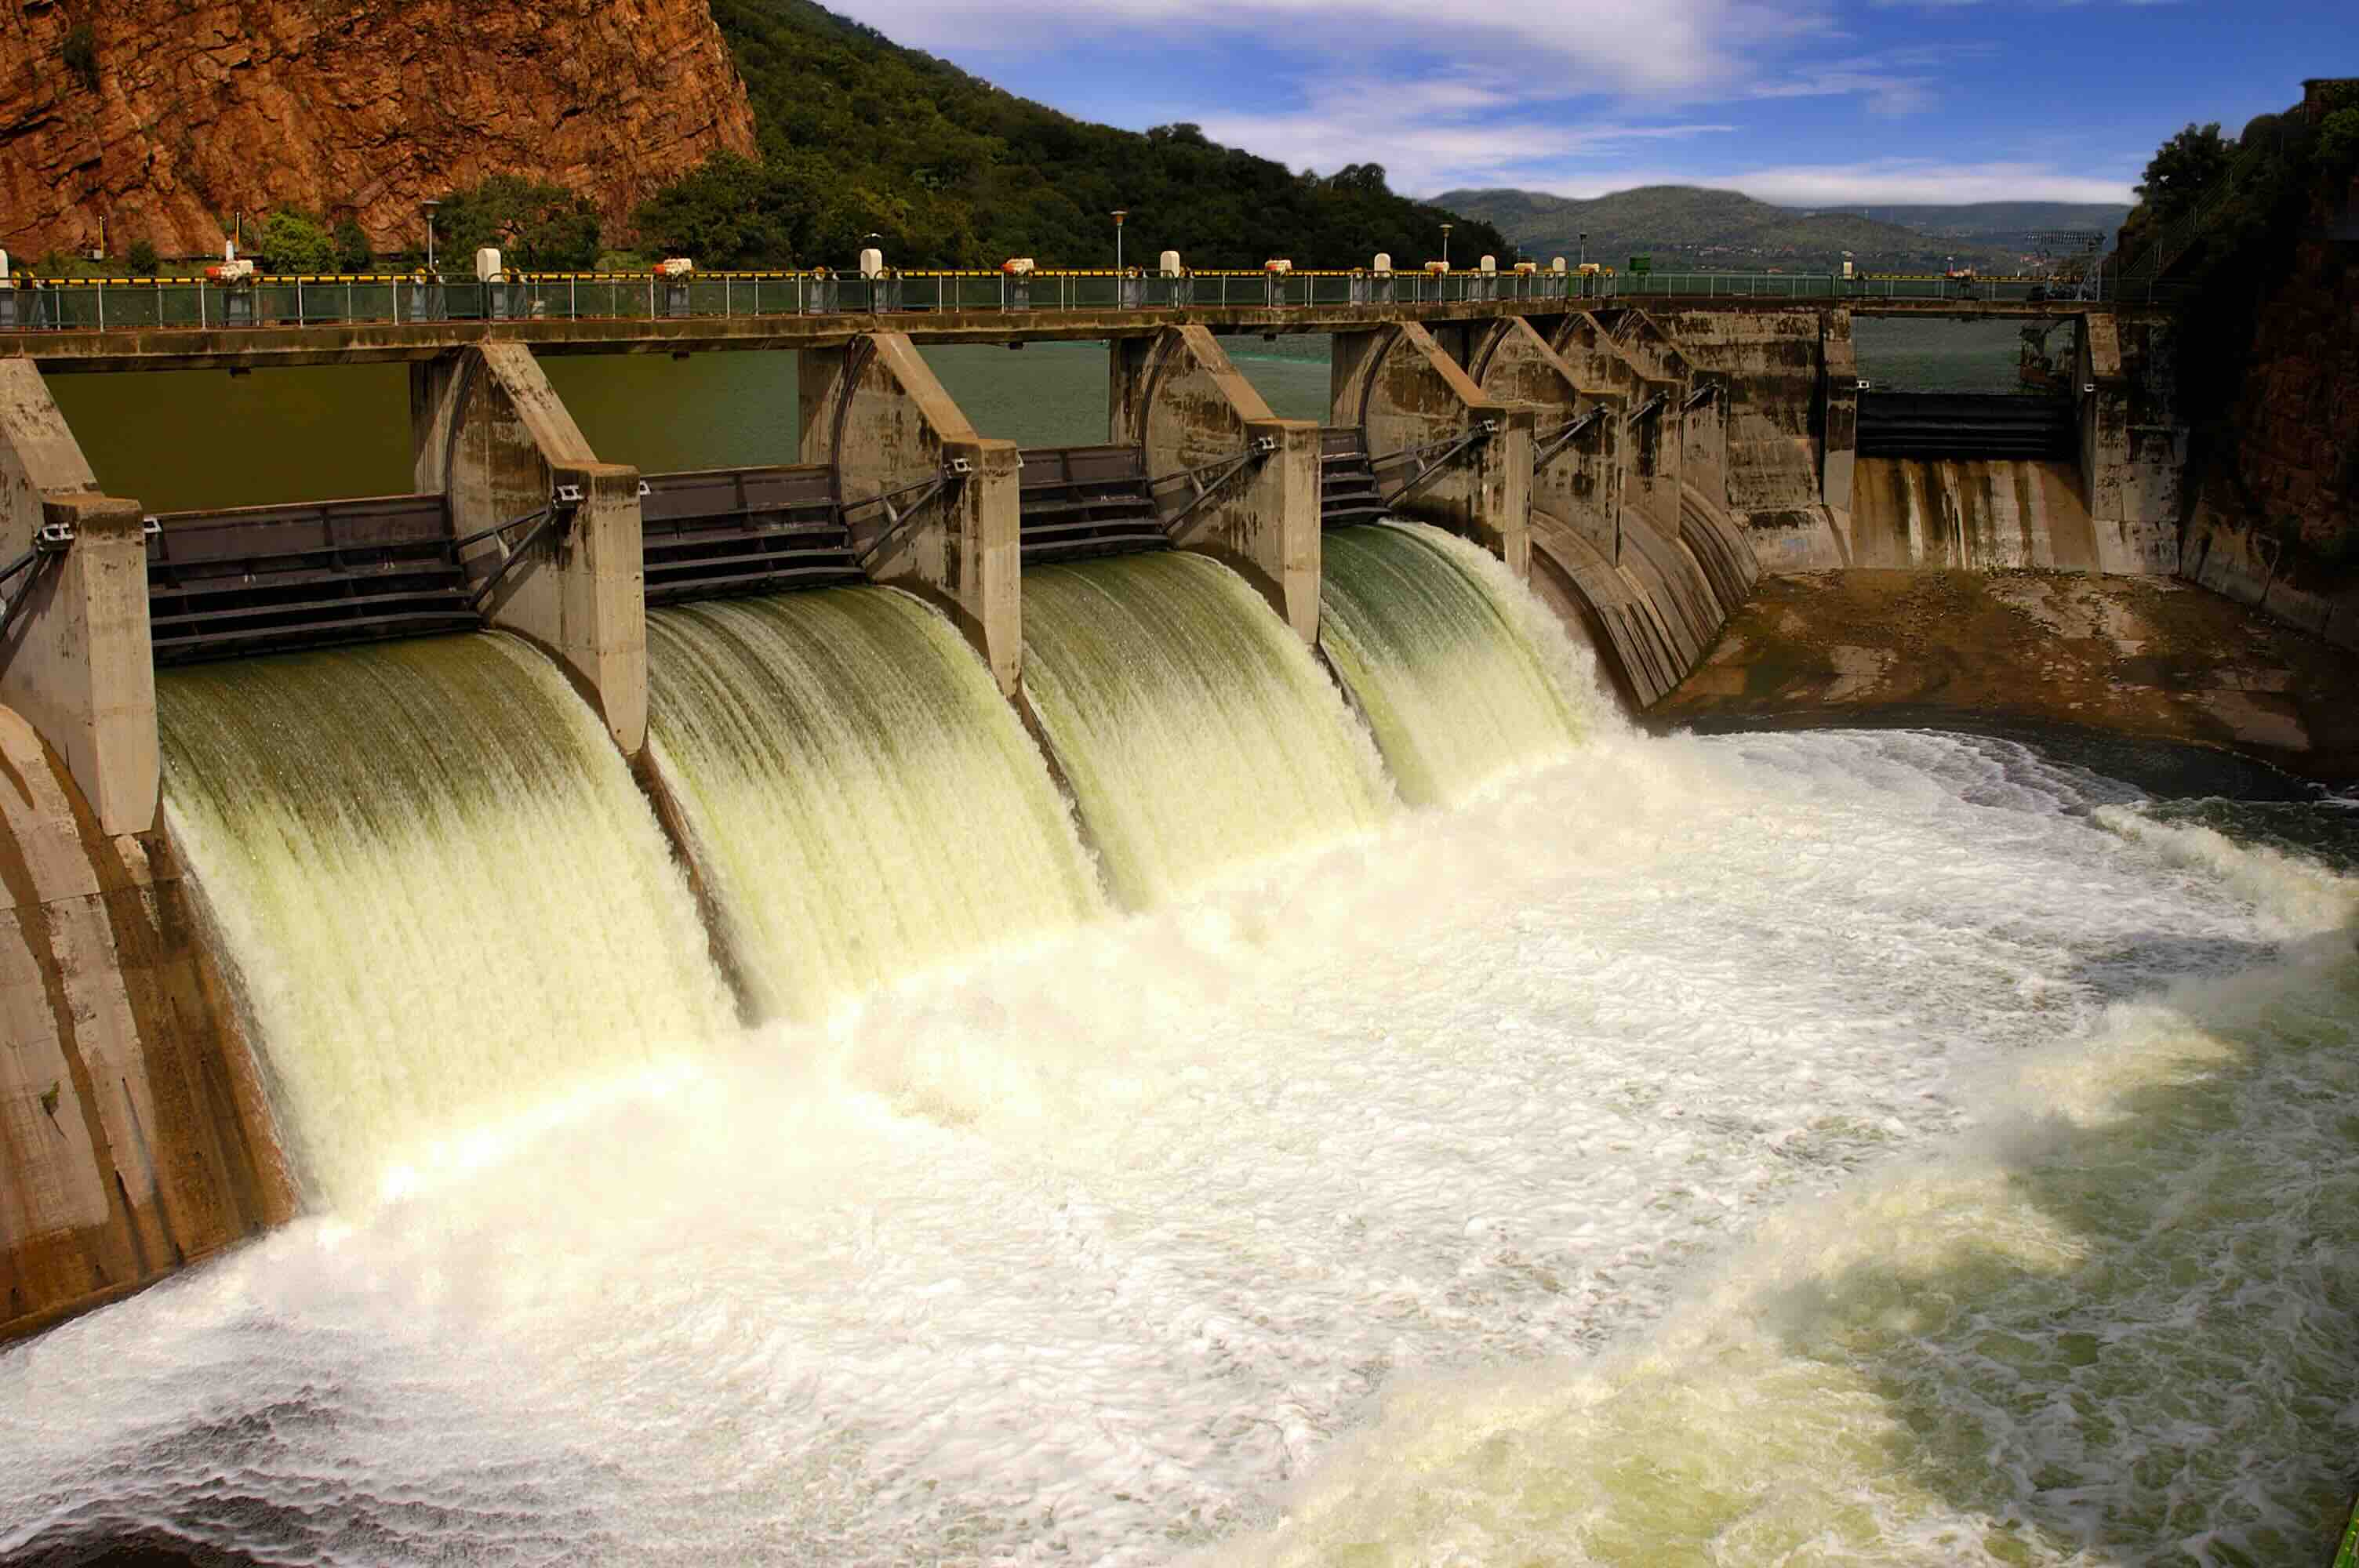 What Effect Would The Construction Of Dams On Major River Systems Have On The Coastal Environment